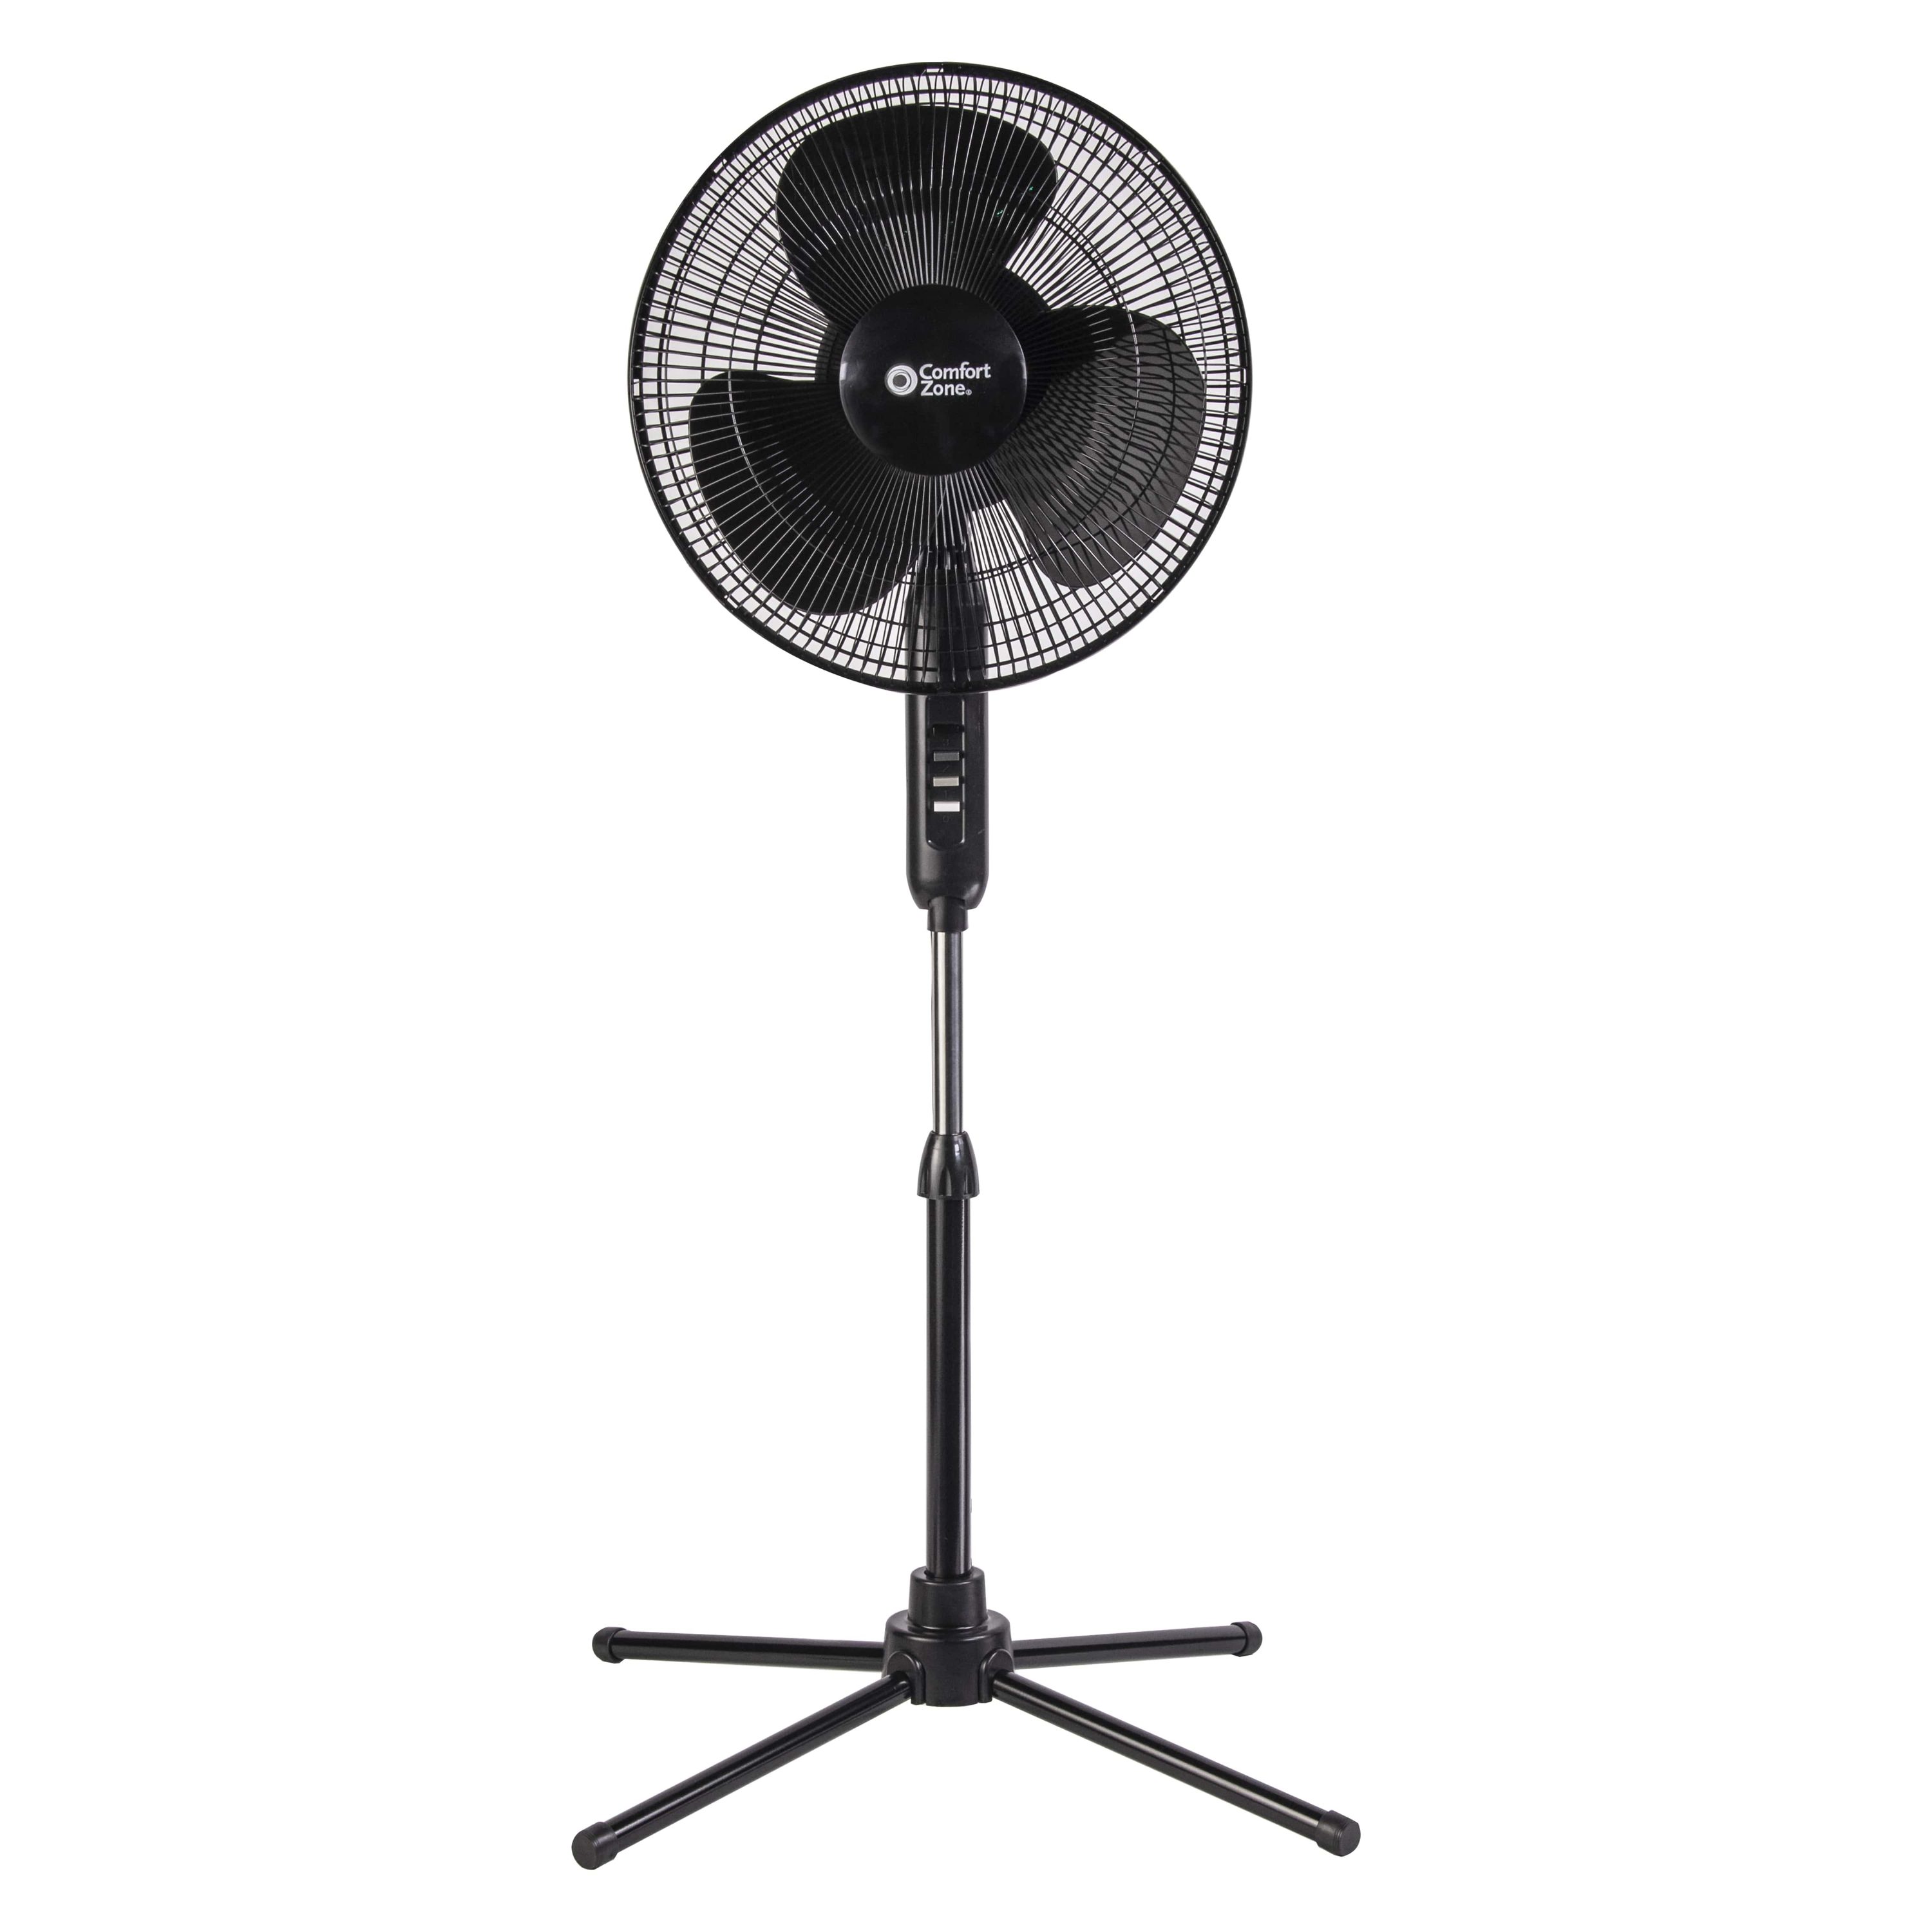 16" ELECTRIC OSCILLATING PEDESTAL AIR COOLING FAN WITH REMOTE CONTROL STANDING 